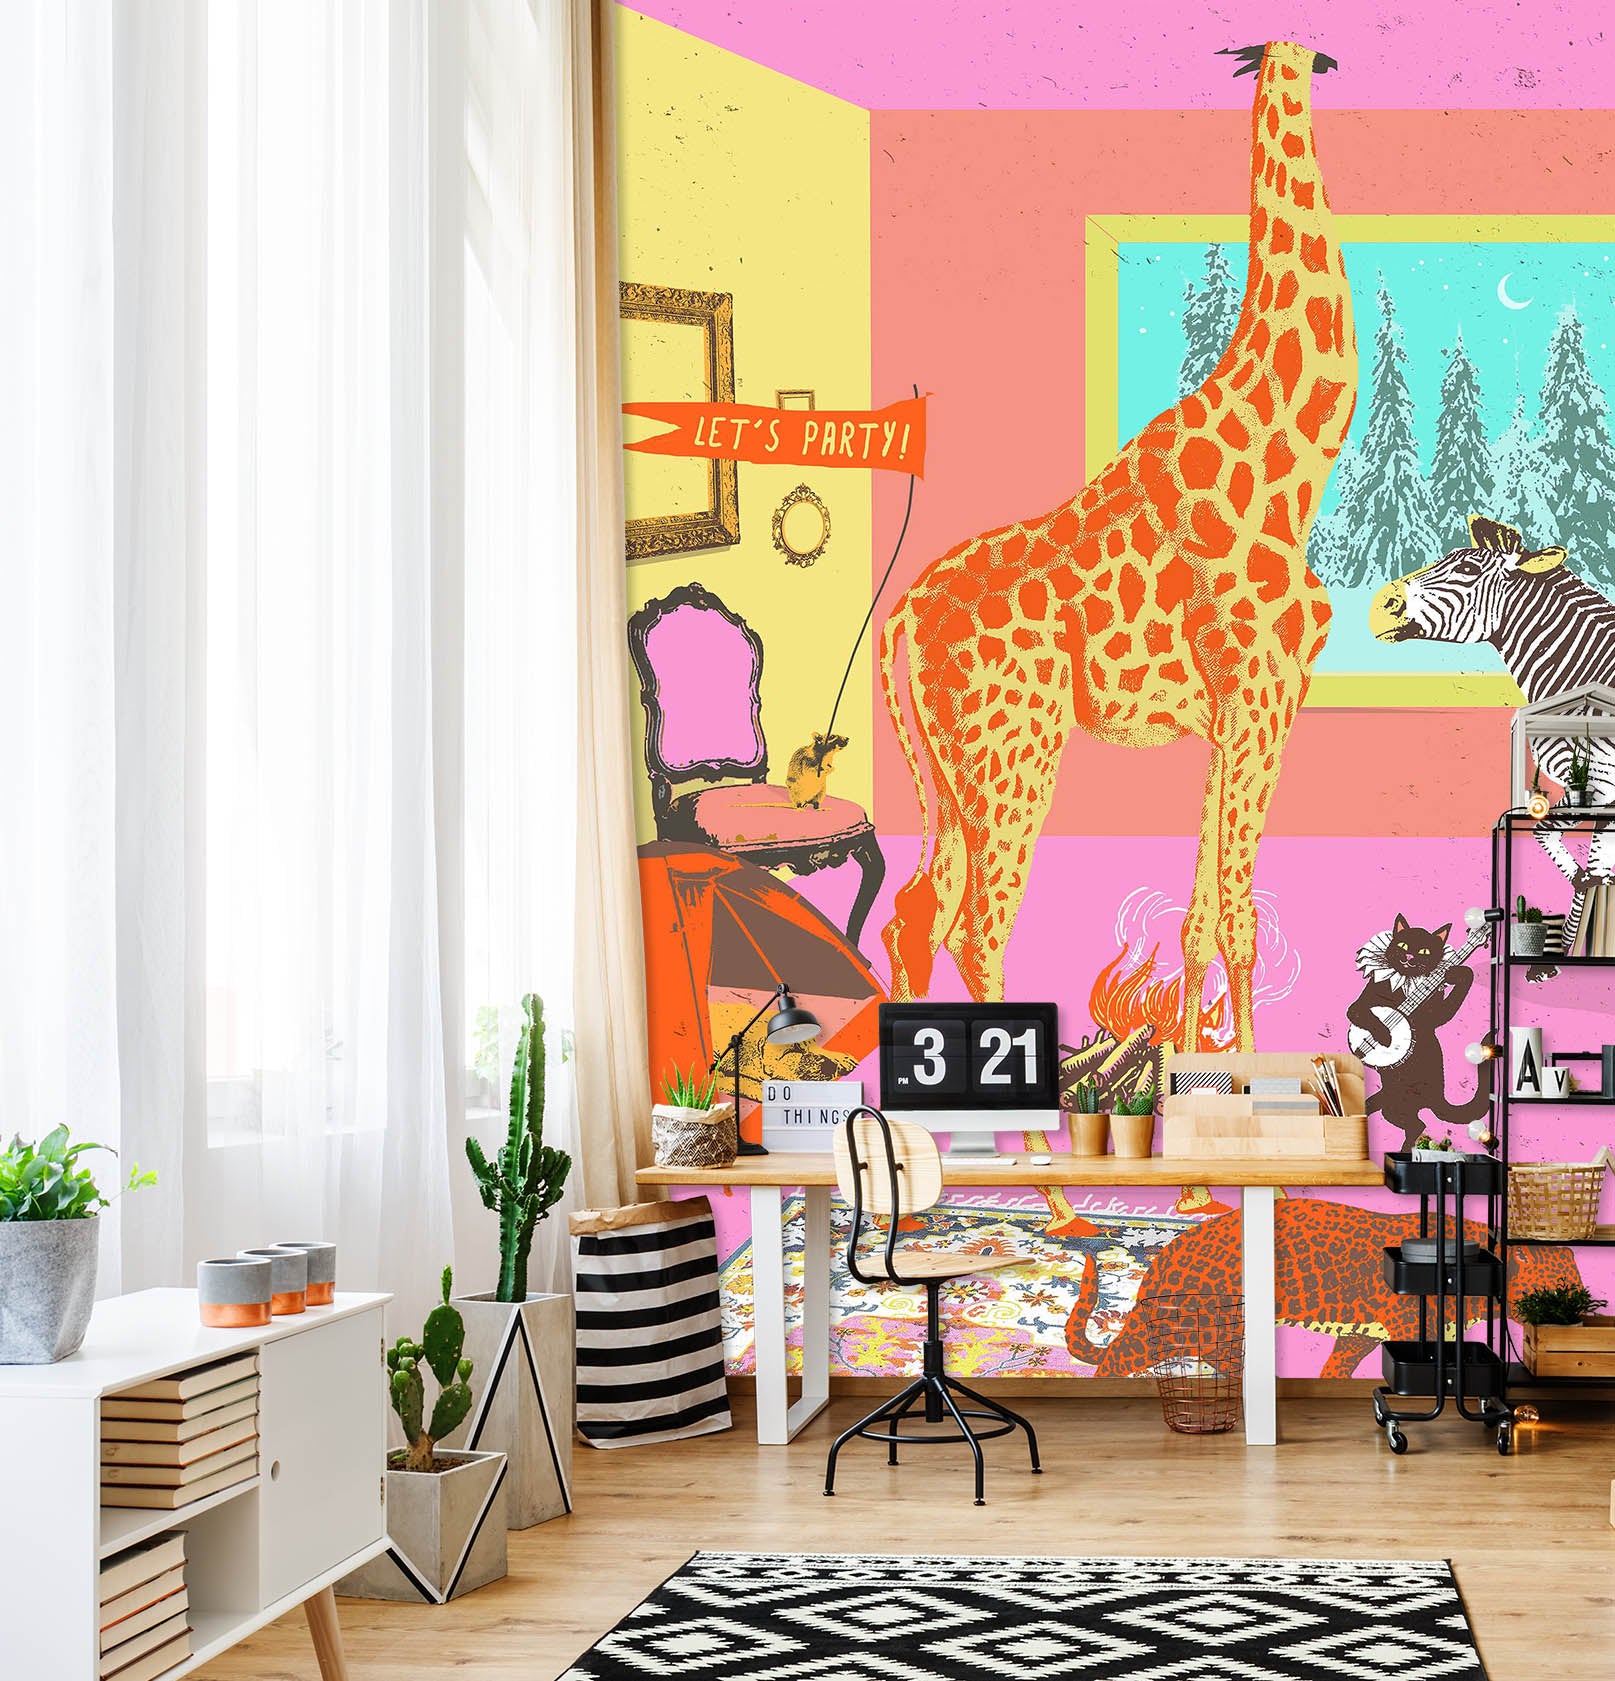 3D Lets Party 1408 Showdeer Wall Mural Wall Murals